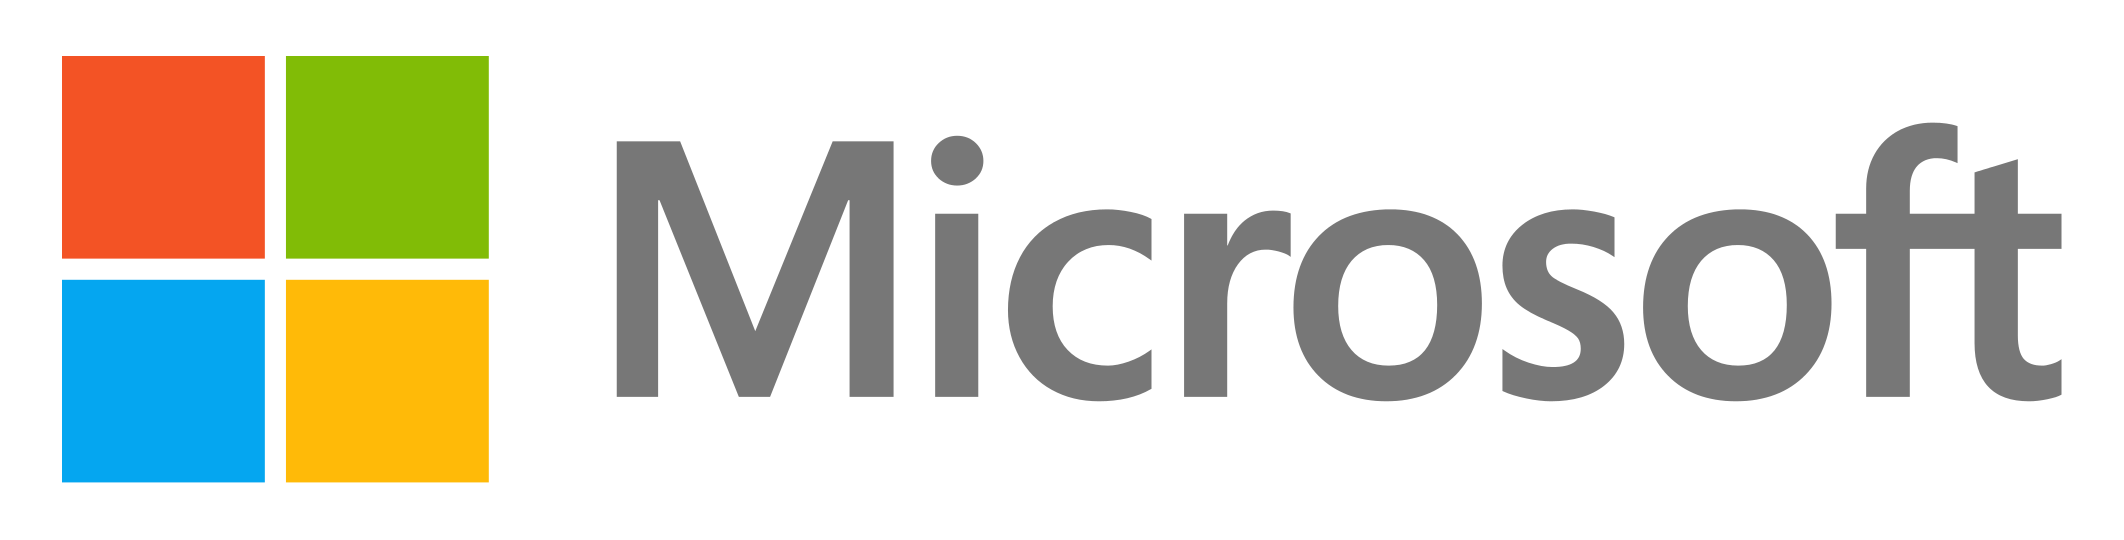 Download Microsoft Logo PNG Image for Free